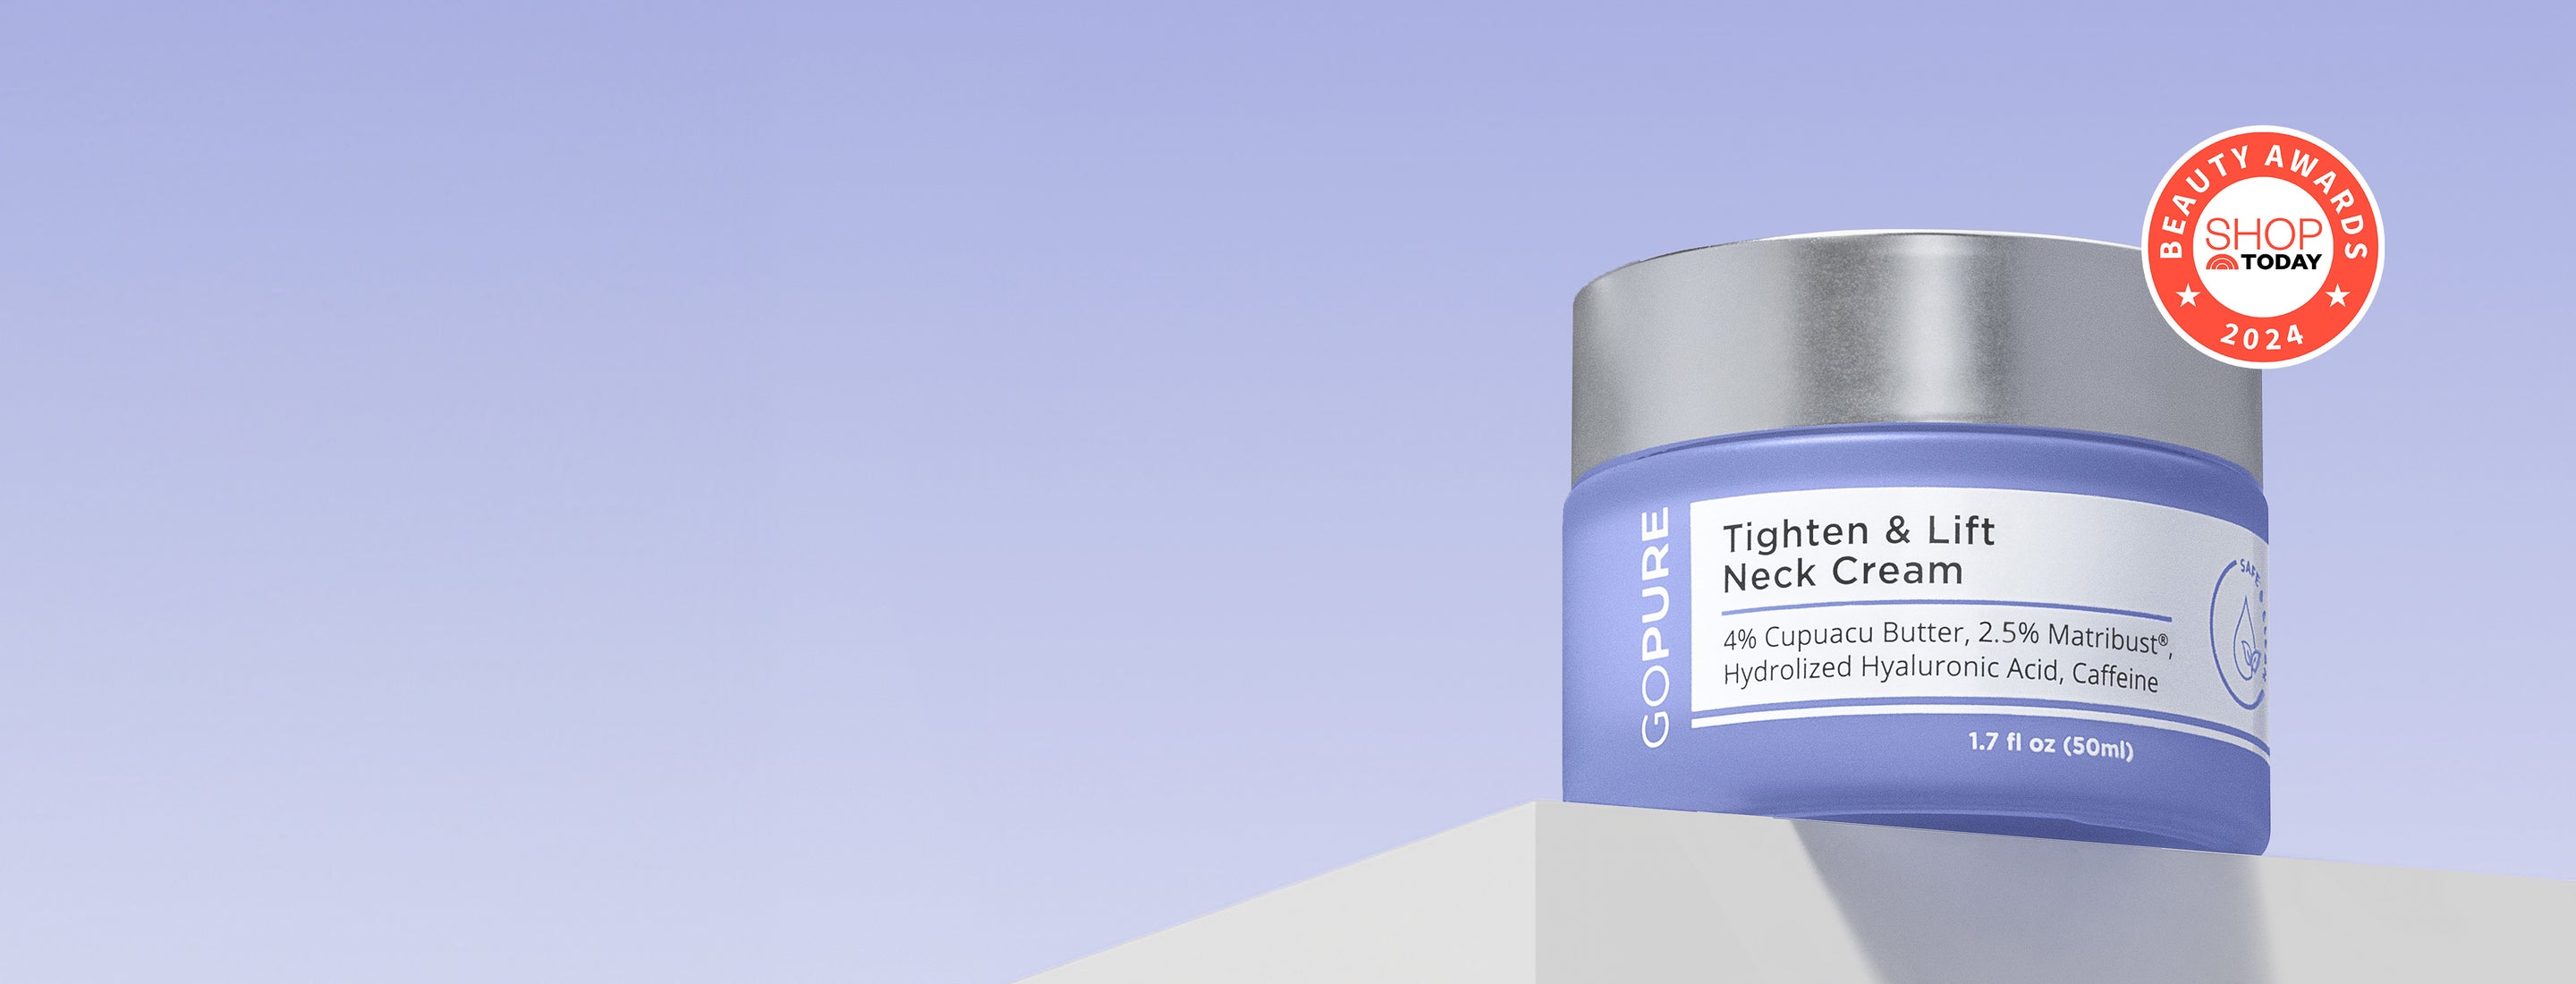 Jar of GoPure Tighten & Lift Neck Cream on a white surface against a purple gradient background. The label highlights 4% Cupuacu Butter, 2% Matrixyl®, Hydrolyzed Hyaluronic Acid, and Caffeine. A "Shop Today Beauty Awards 2024" badge is on the right.